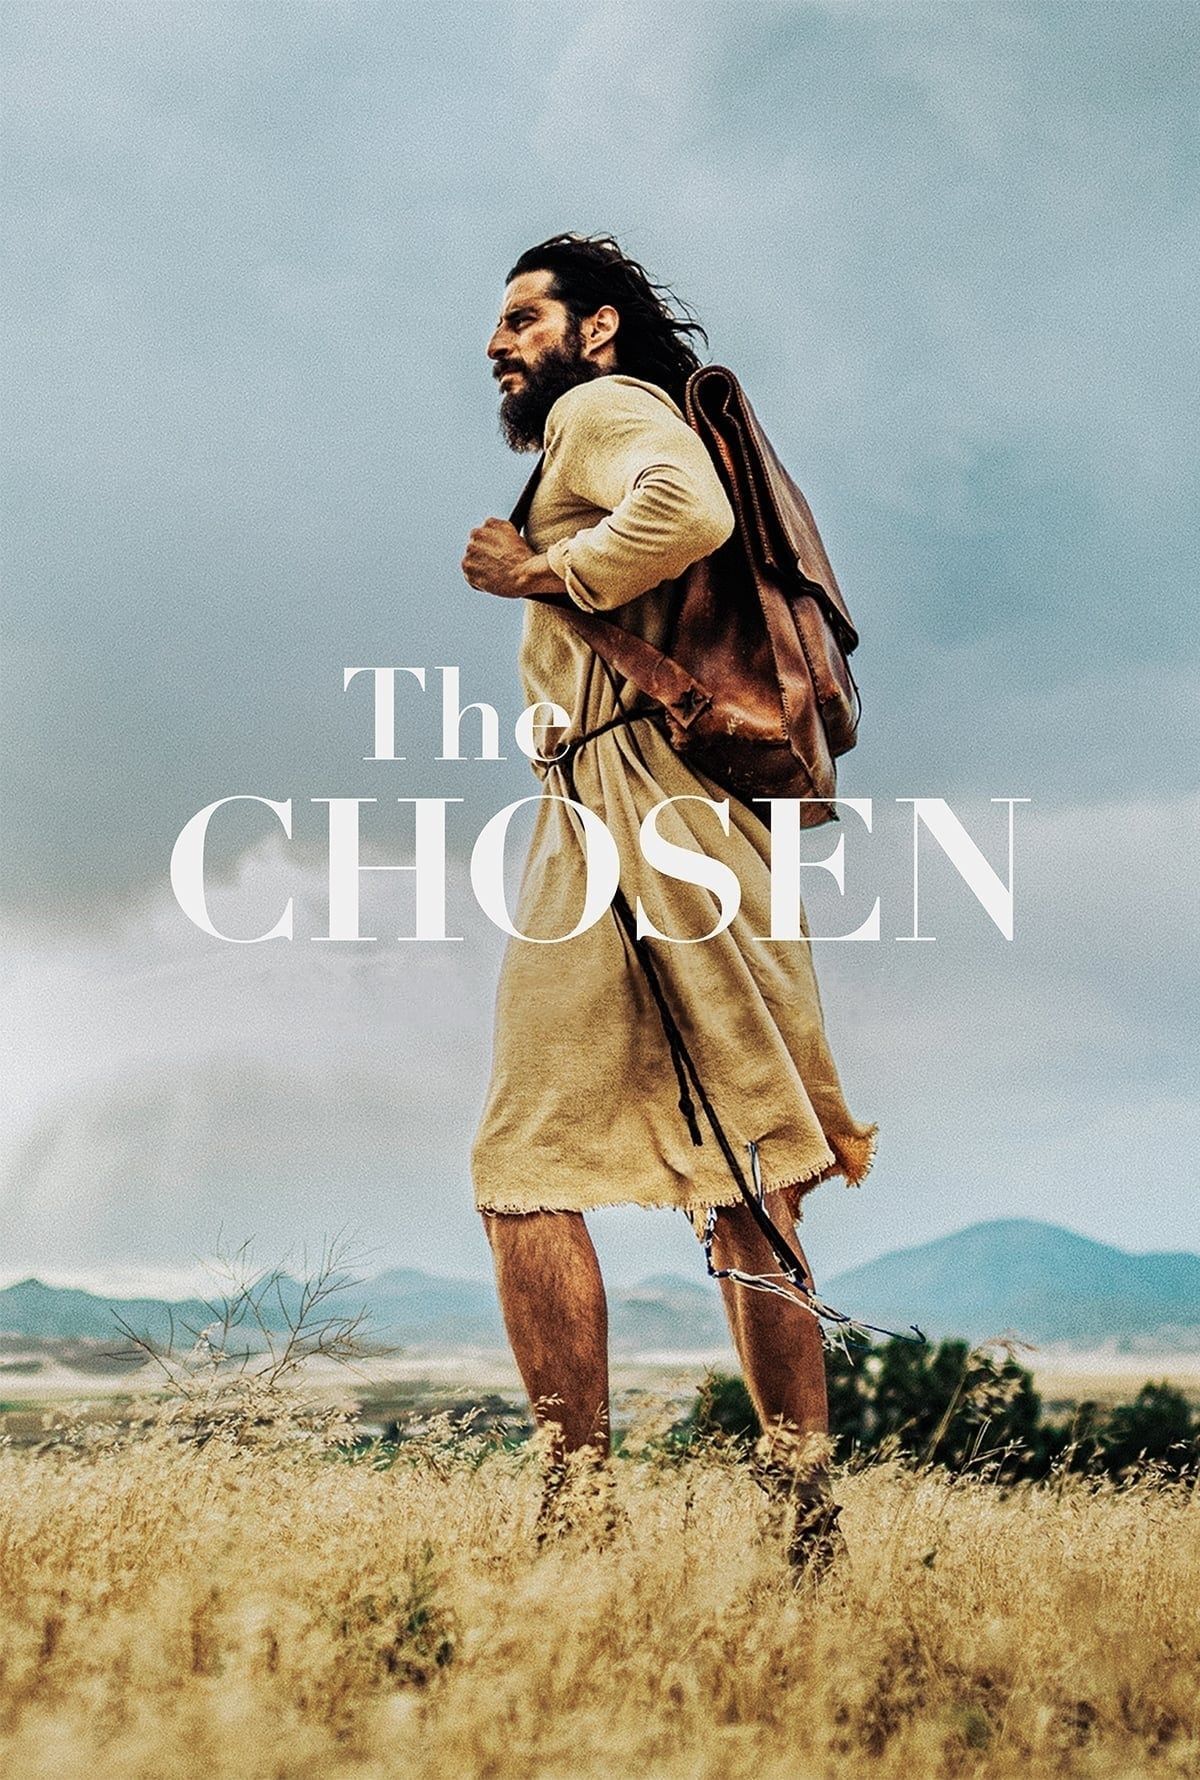 The Chosen, Watch Online For Free